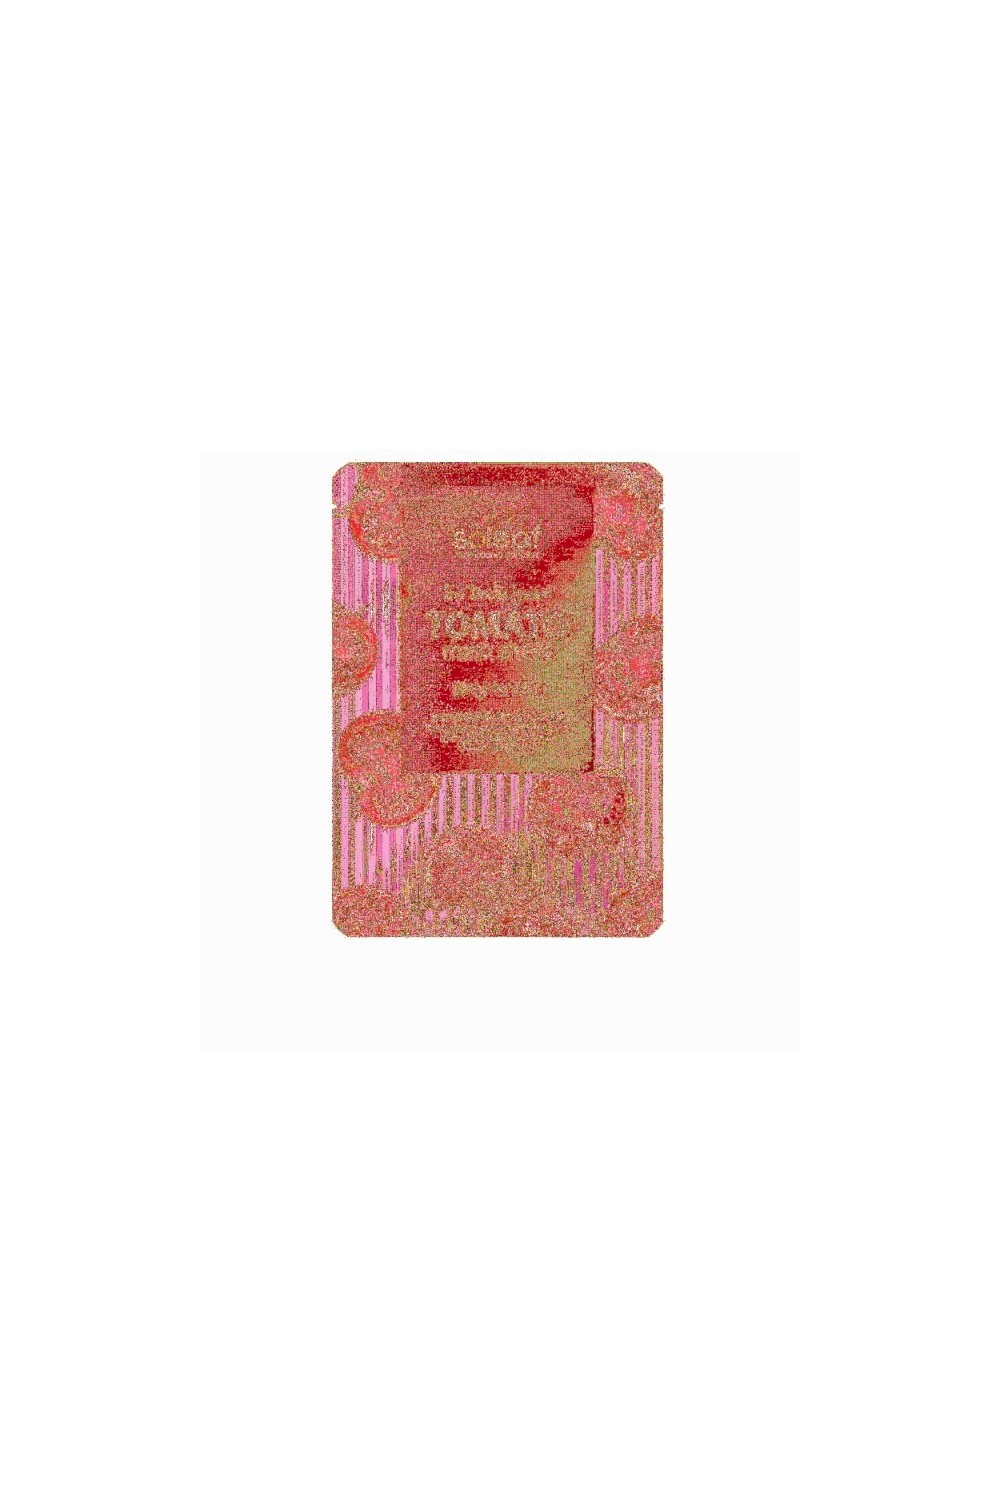 Soleaf So Delicious Tomato Mask Sheet Brightening